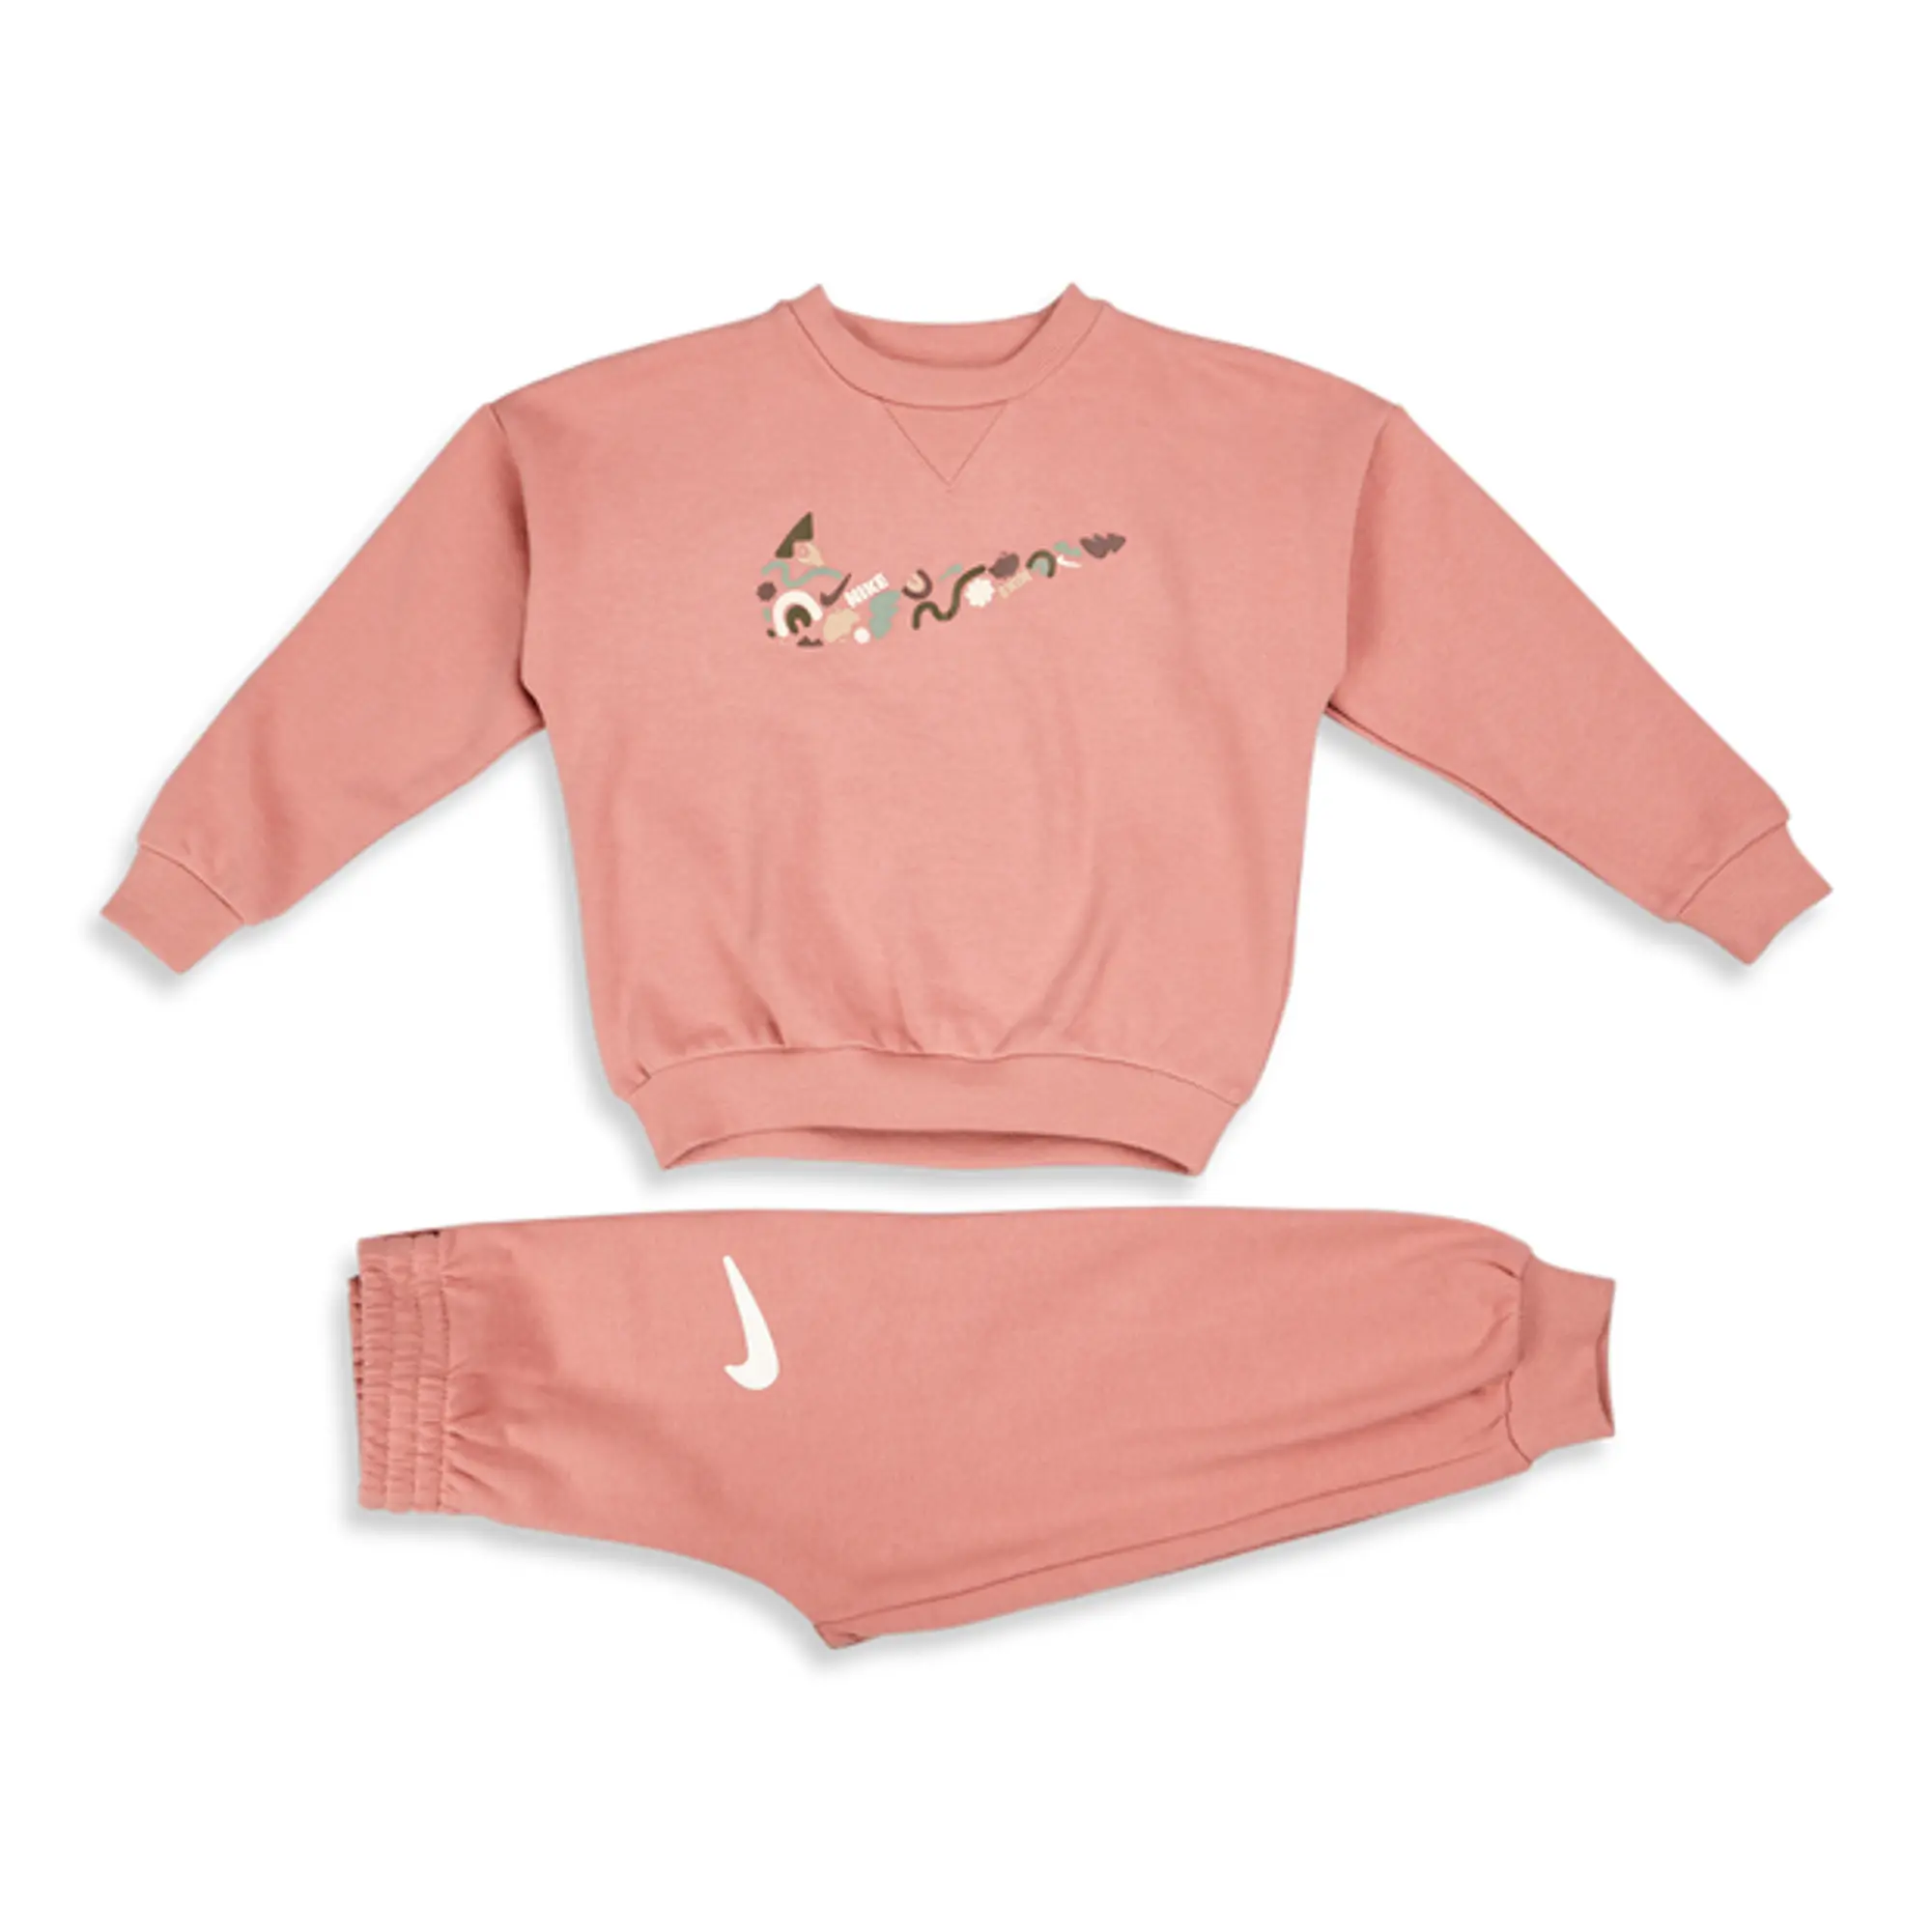 Nike Prm Ply T/Suit In41 - Pink